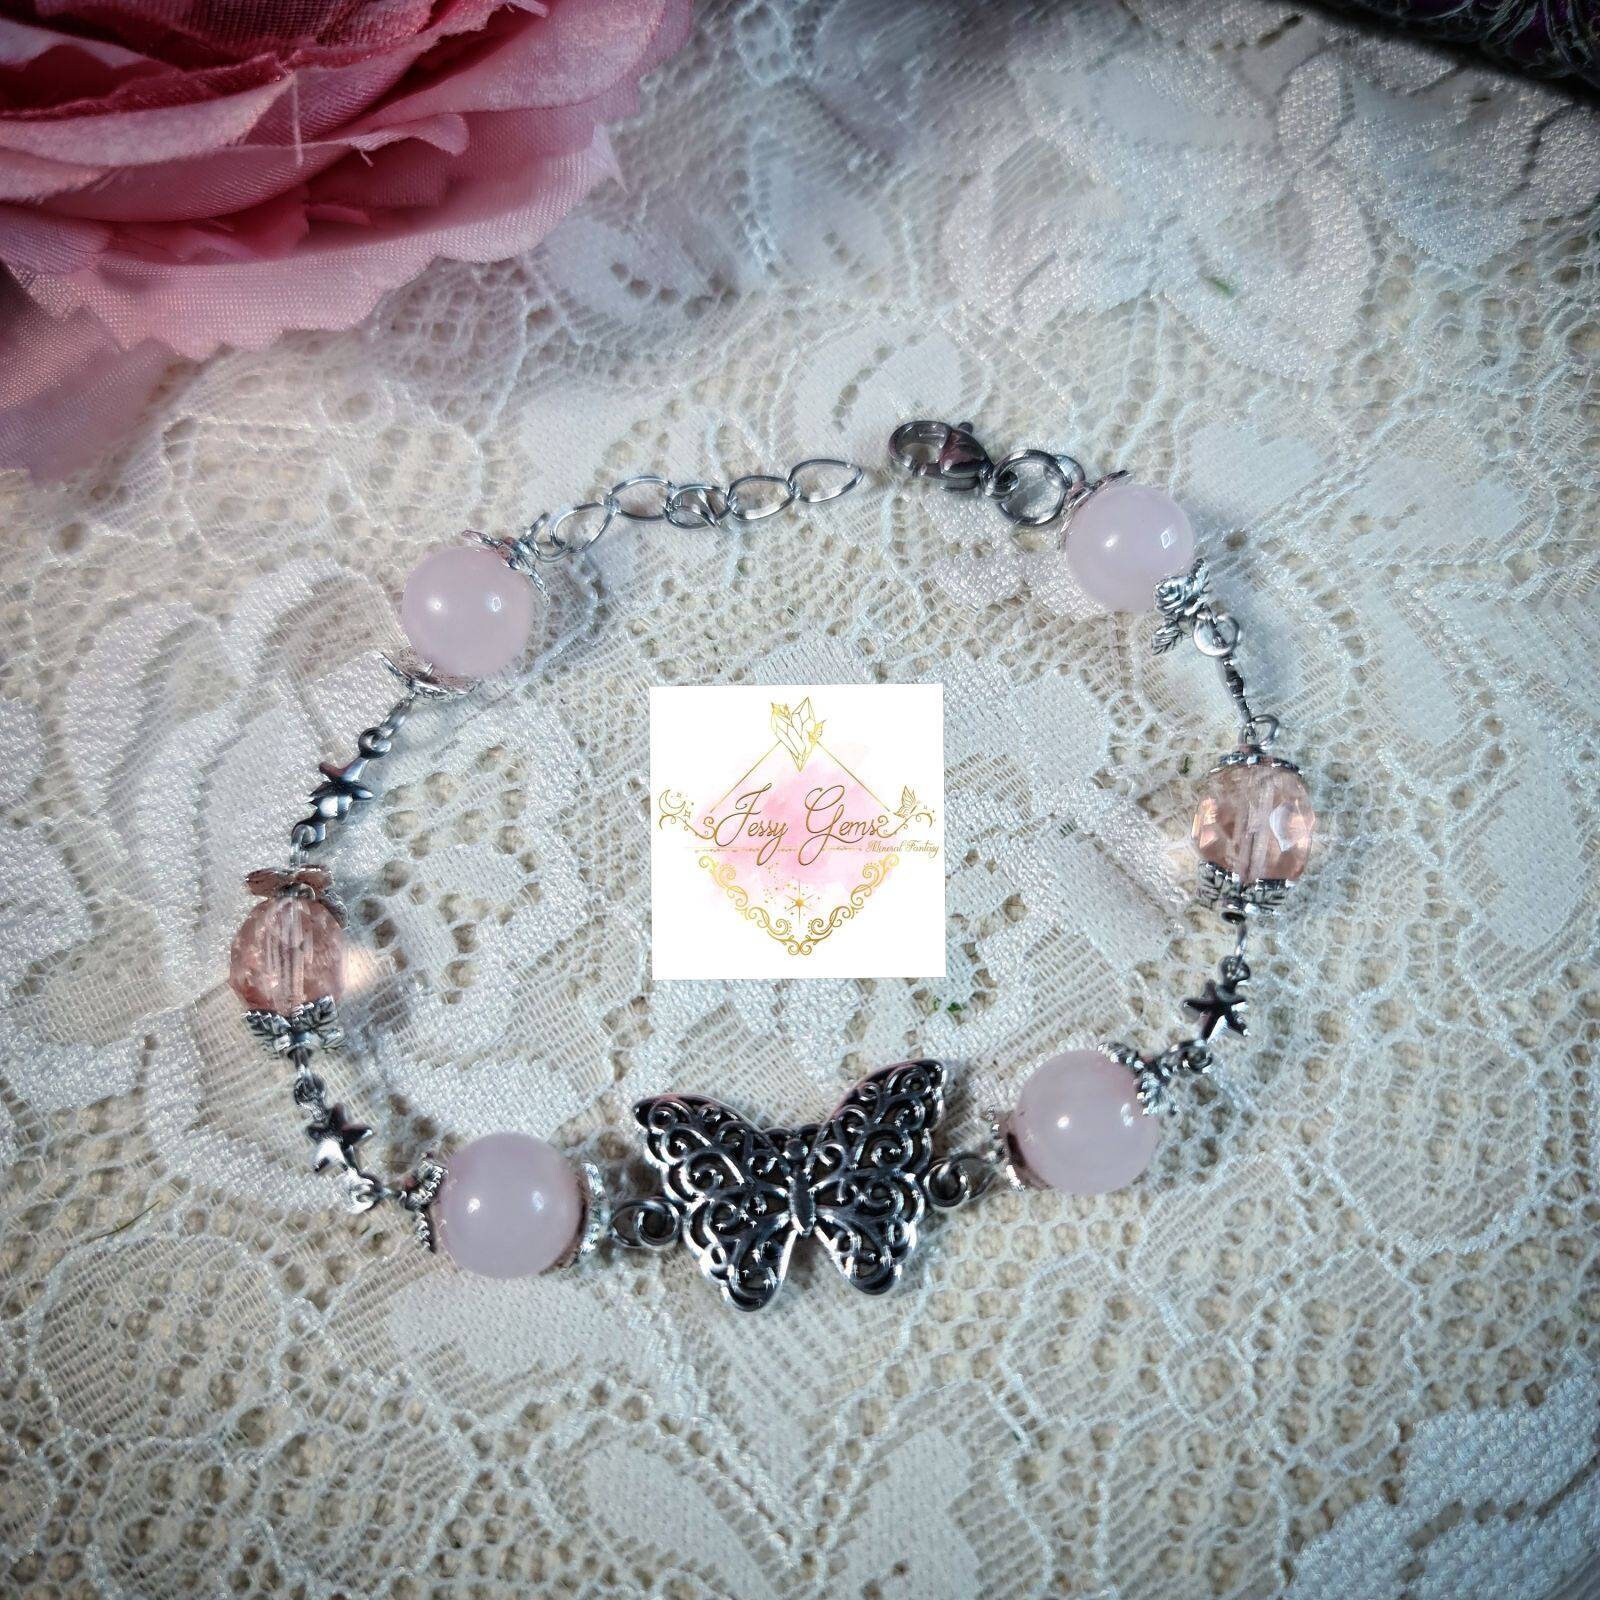 Moonstone Gentle bracelet pearl Feminine jewelry lithotherapy Pearl bracelet Natural stone well-being jewelry Rose quartz